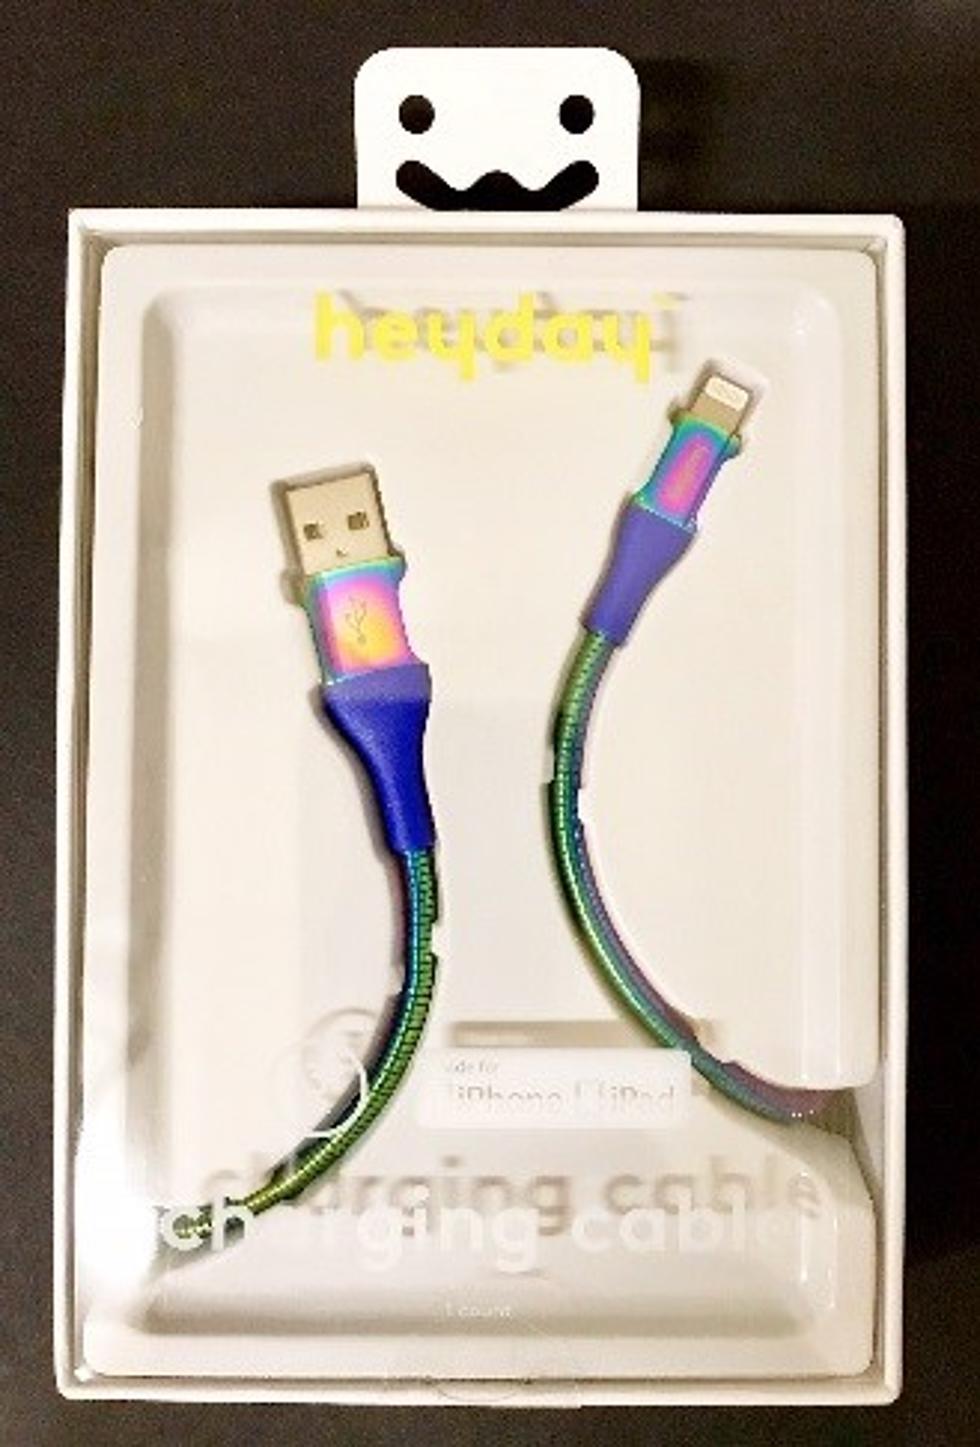 Target Recalls USB Charging Cables Due To Shock And Fire Hazard